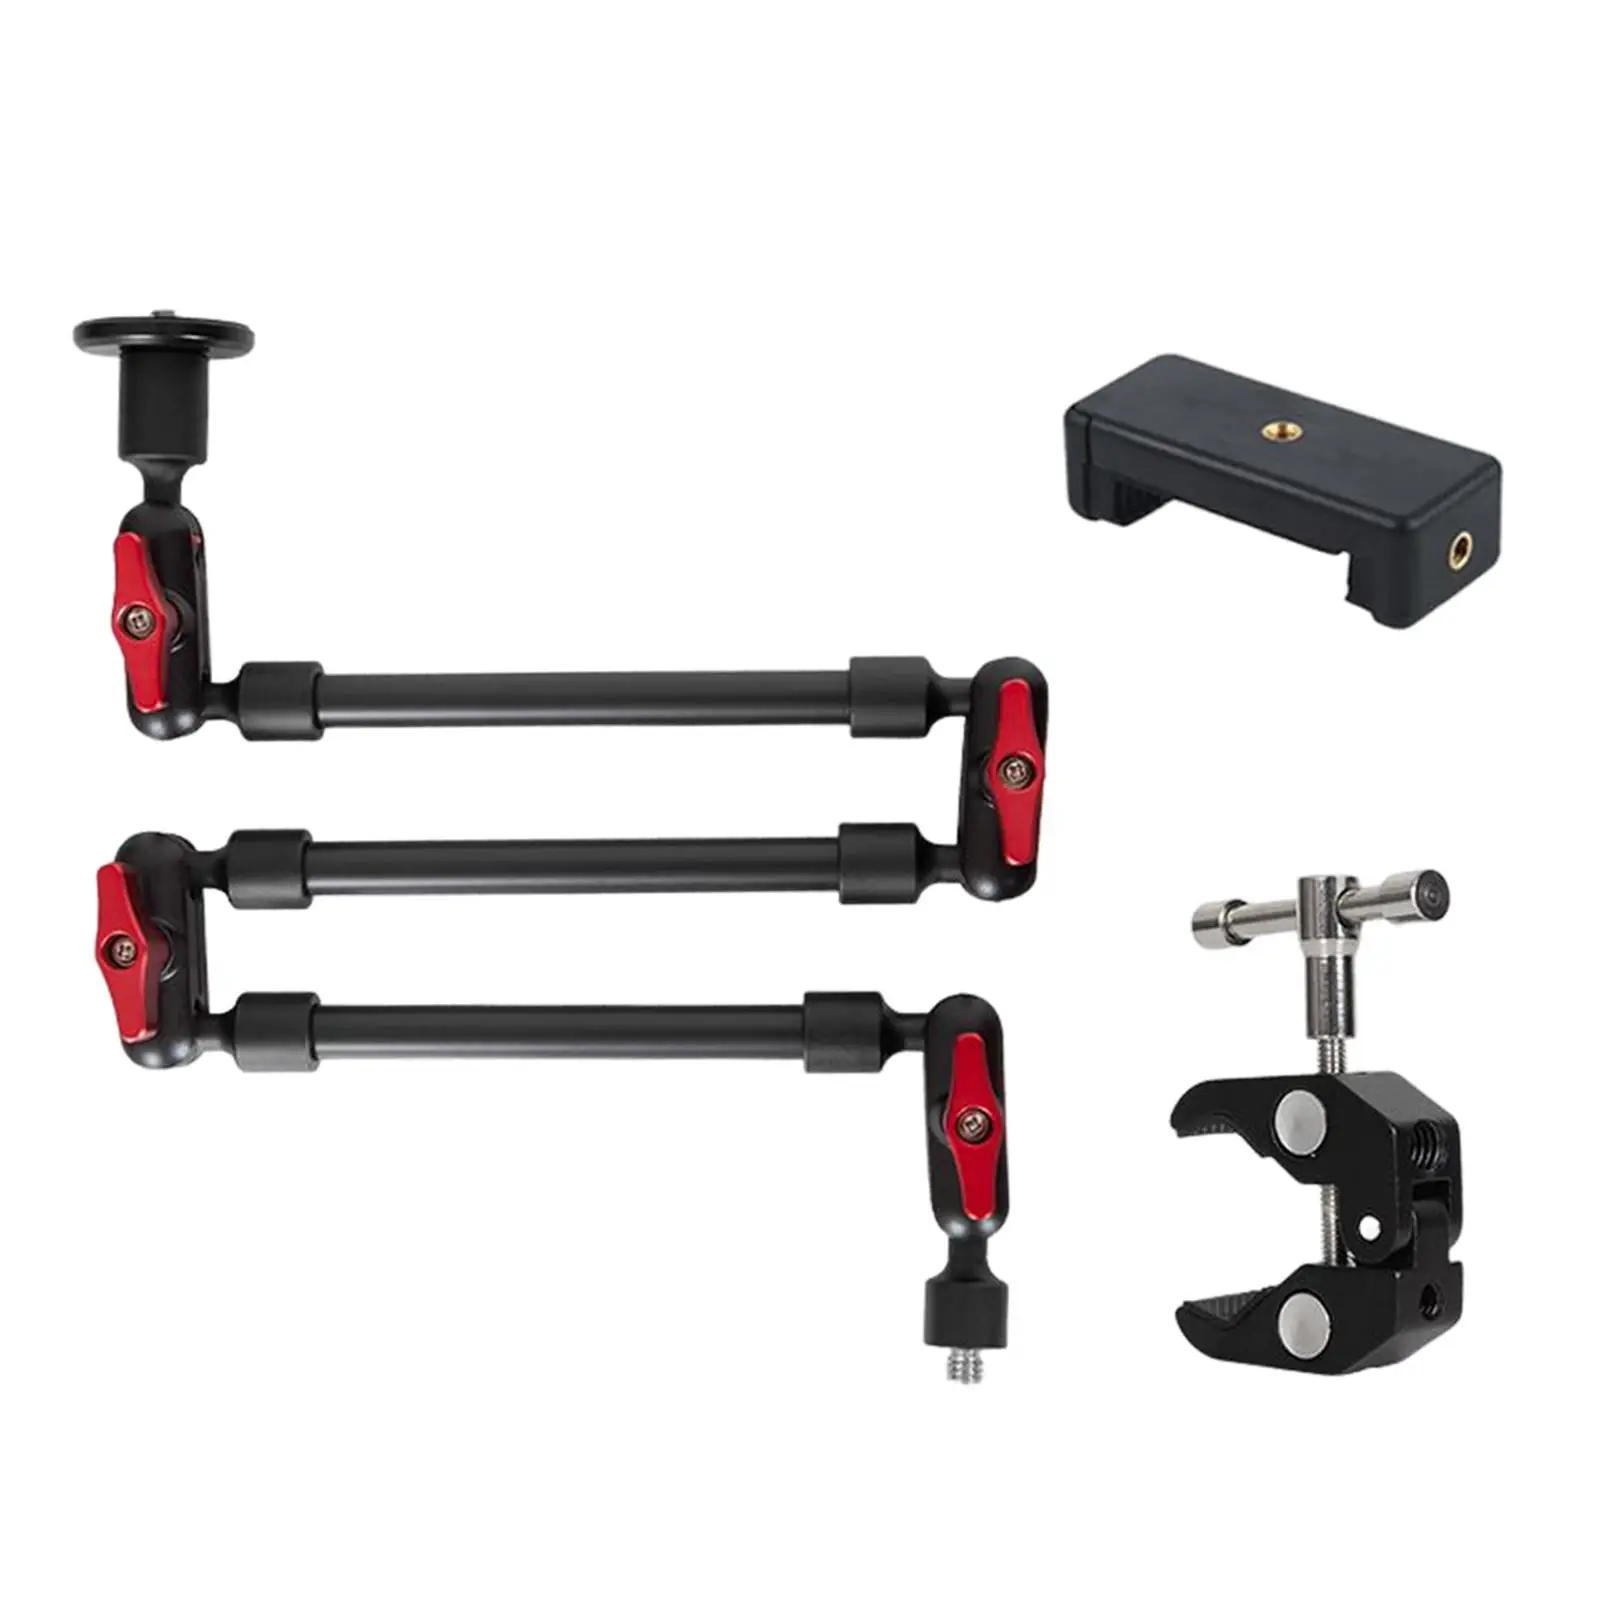 

Flexible Arm Mounts Mount Adapter with 1/4inch and 3/8inch Thread Universal Magic Friction Arms for action Camera Studio Video